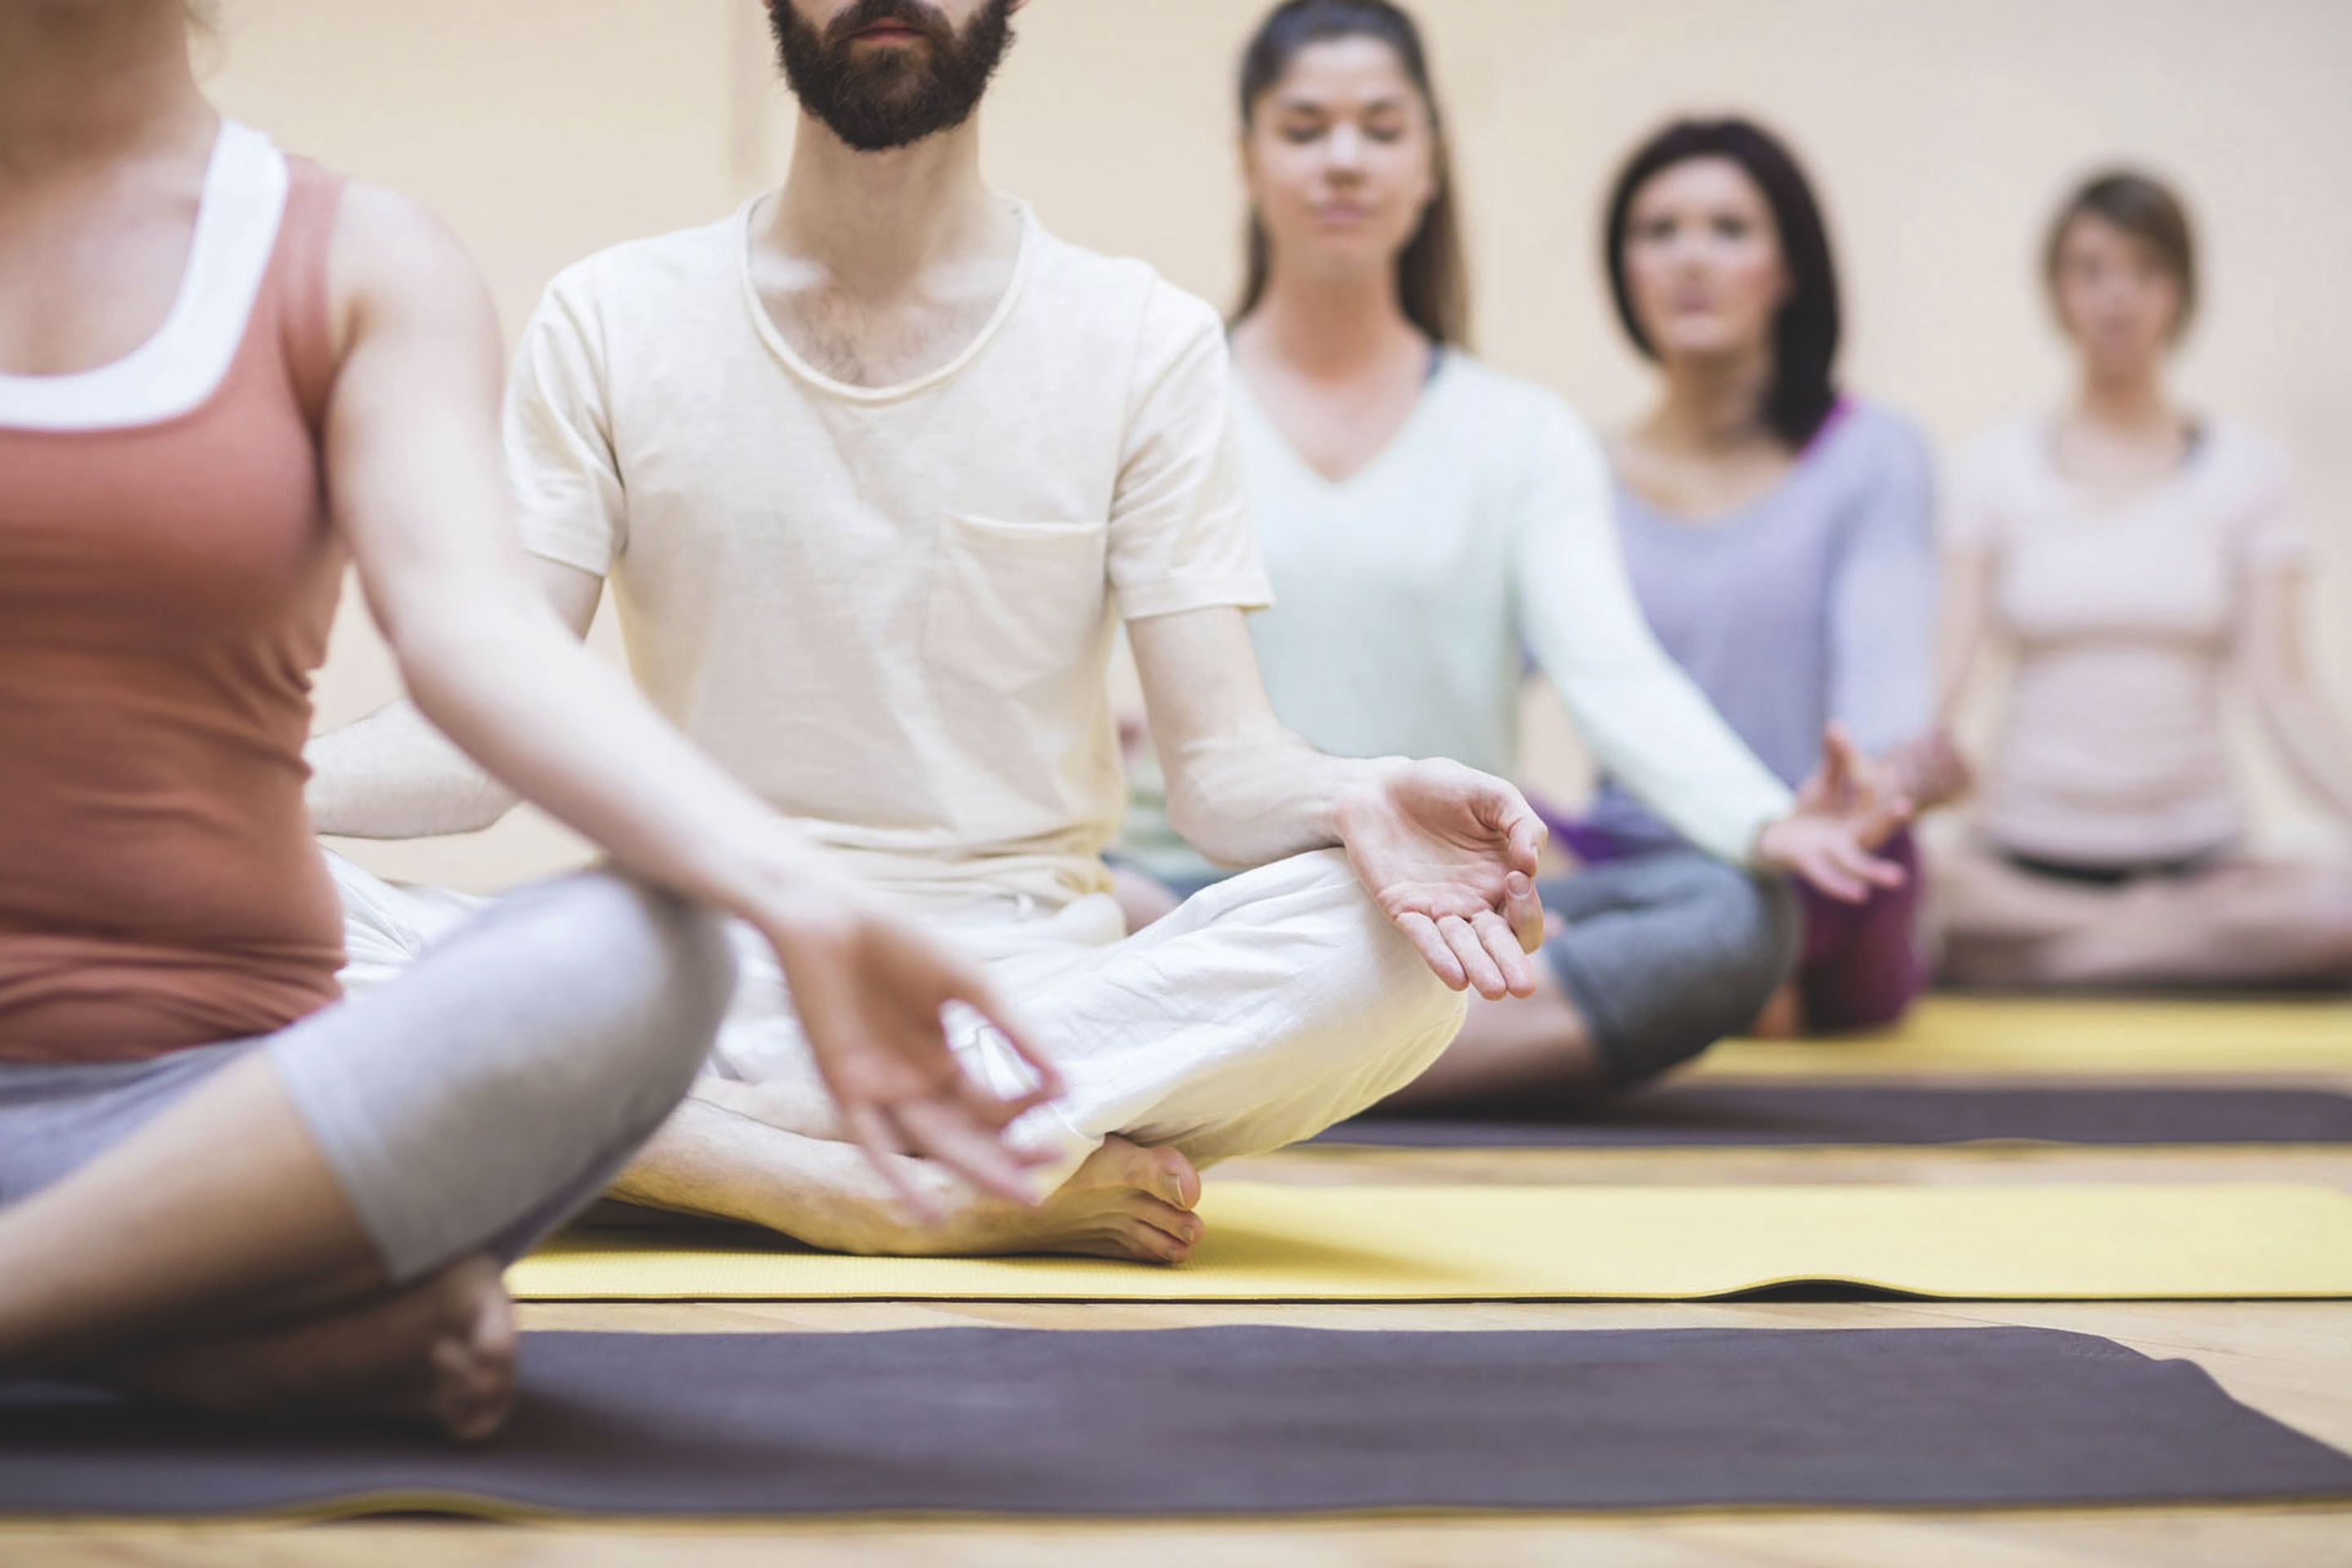 a group of people sit in a lotus position on yoga mats